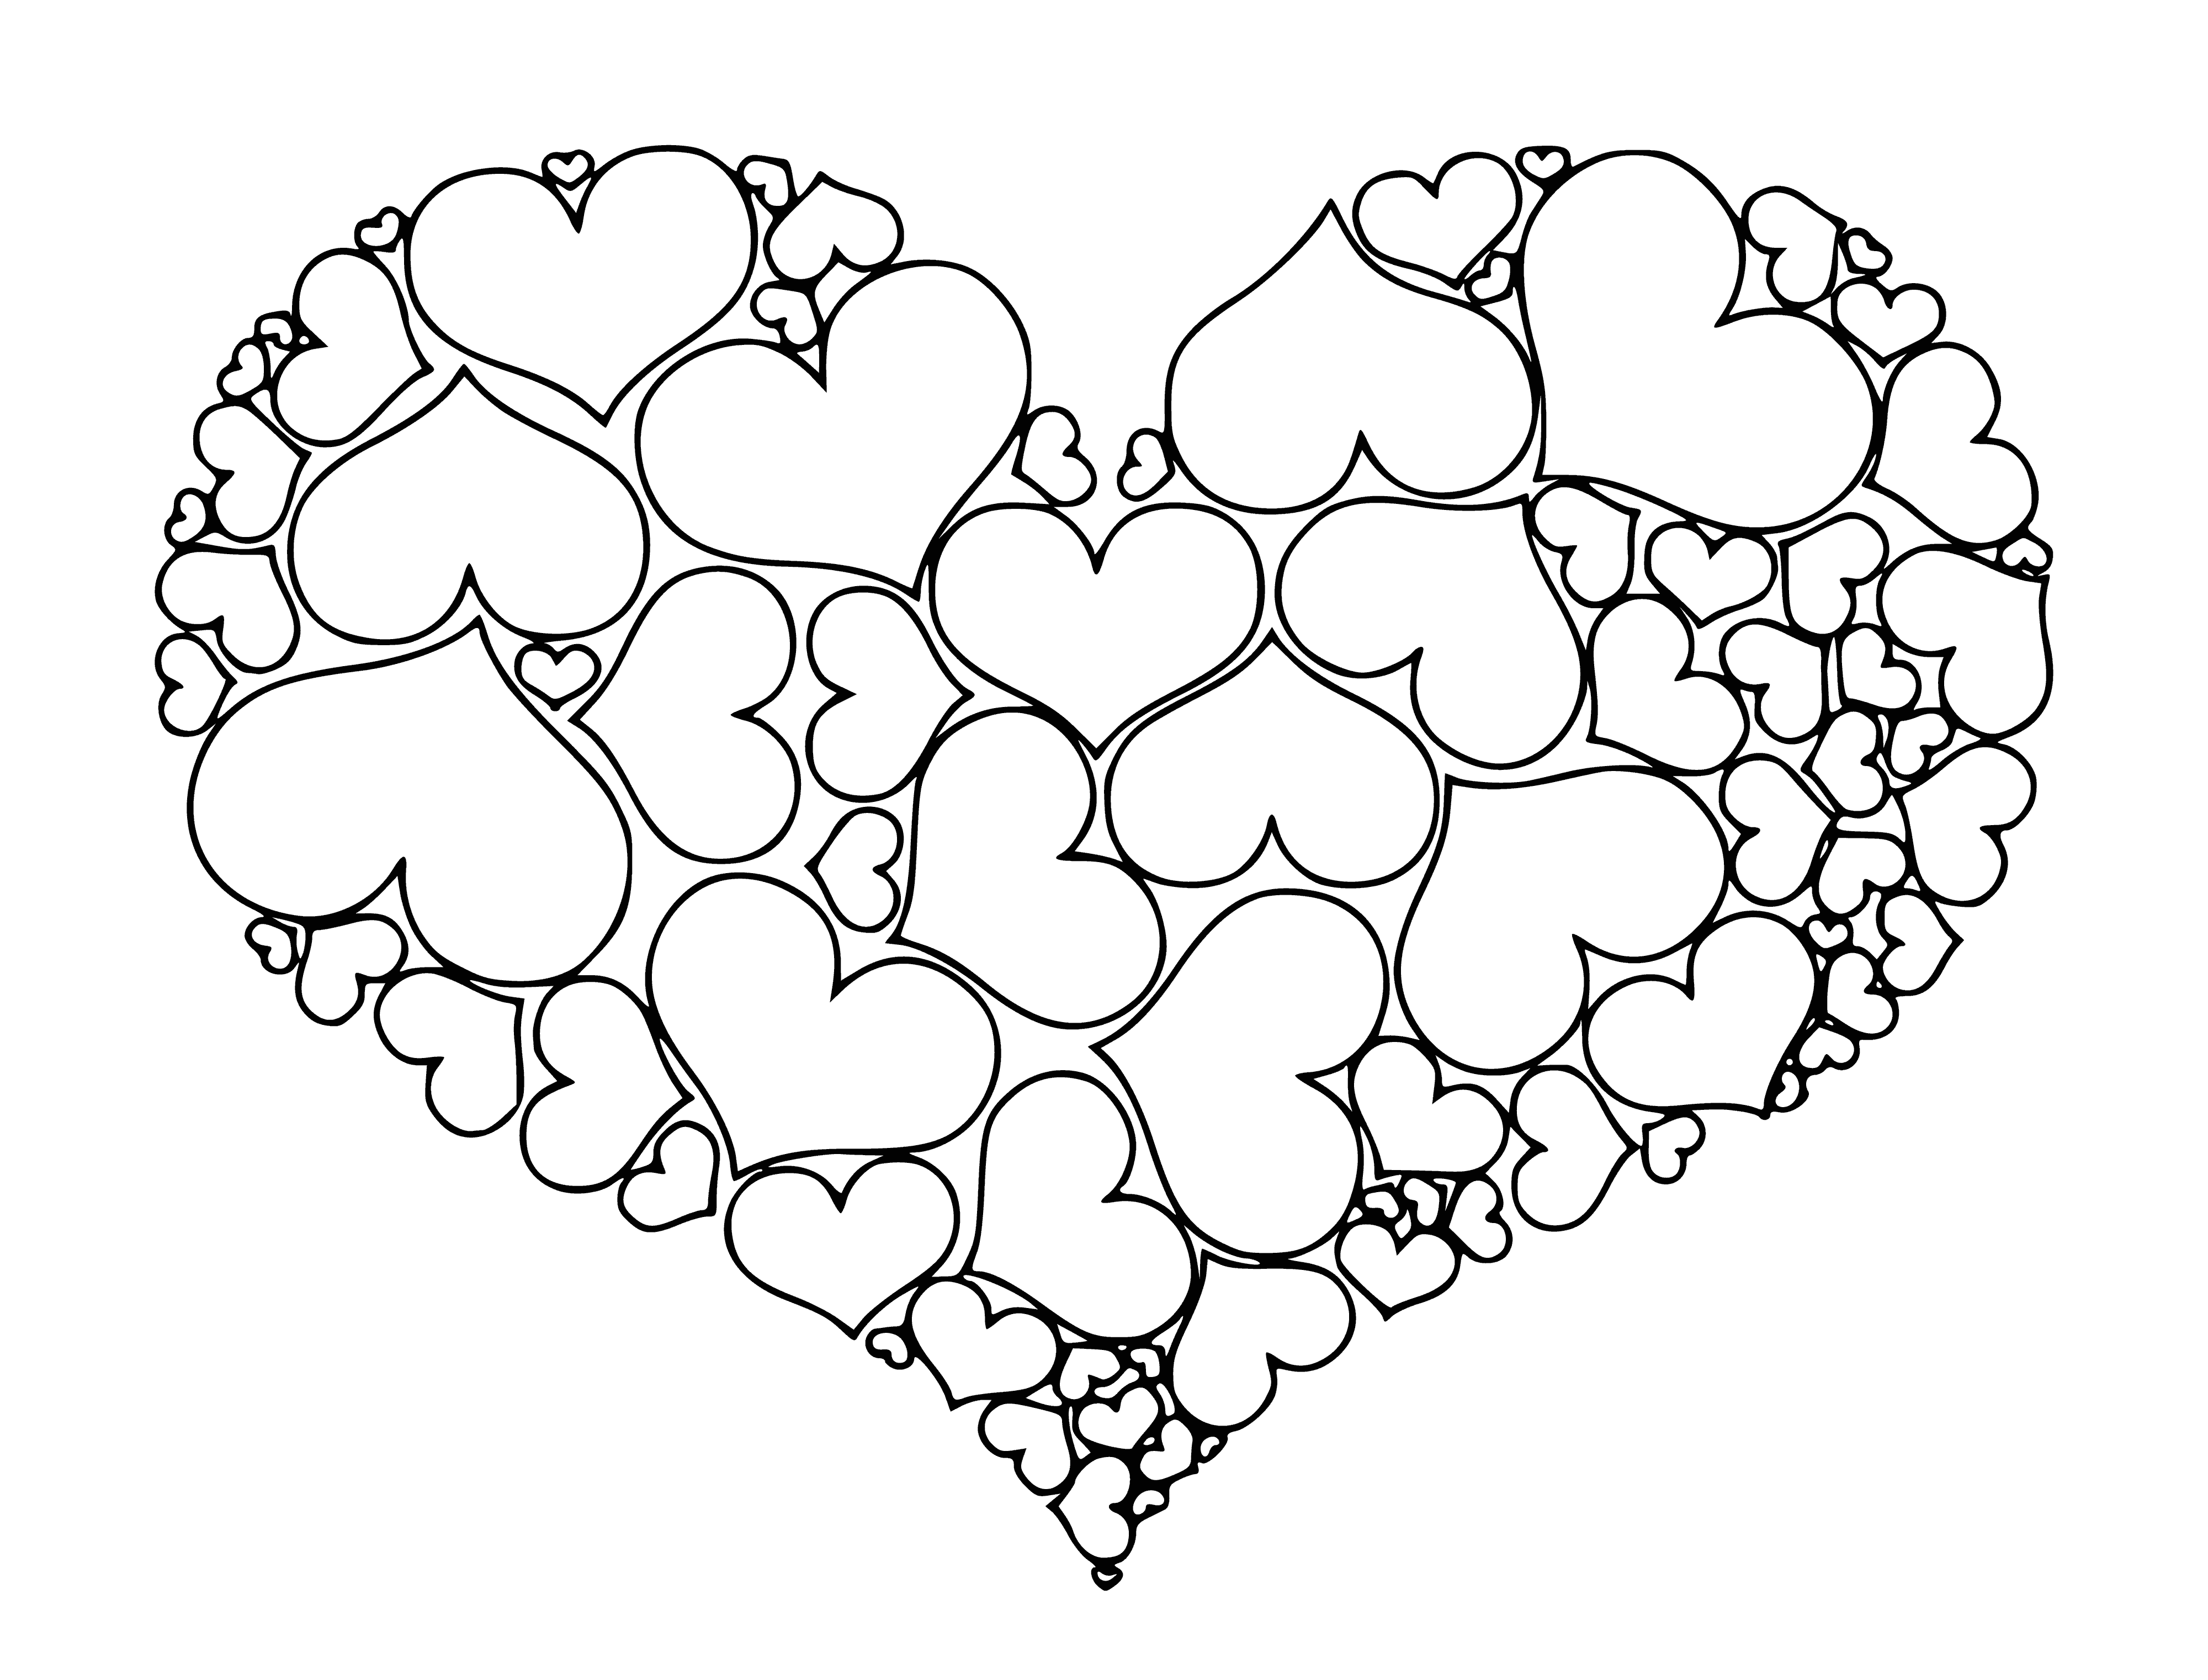 coloring page: Large heart-shaped object with white designs & small dark object in its center; deep red color.